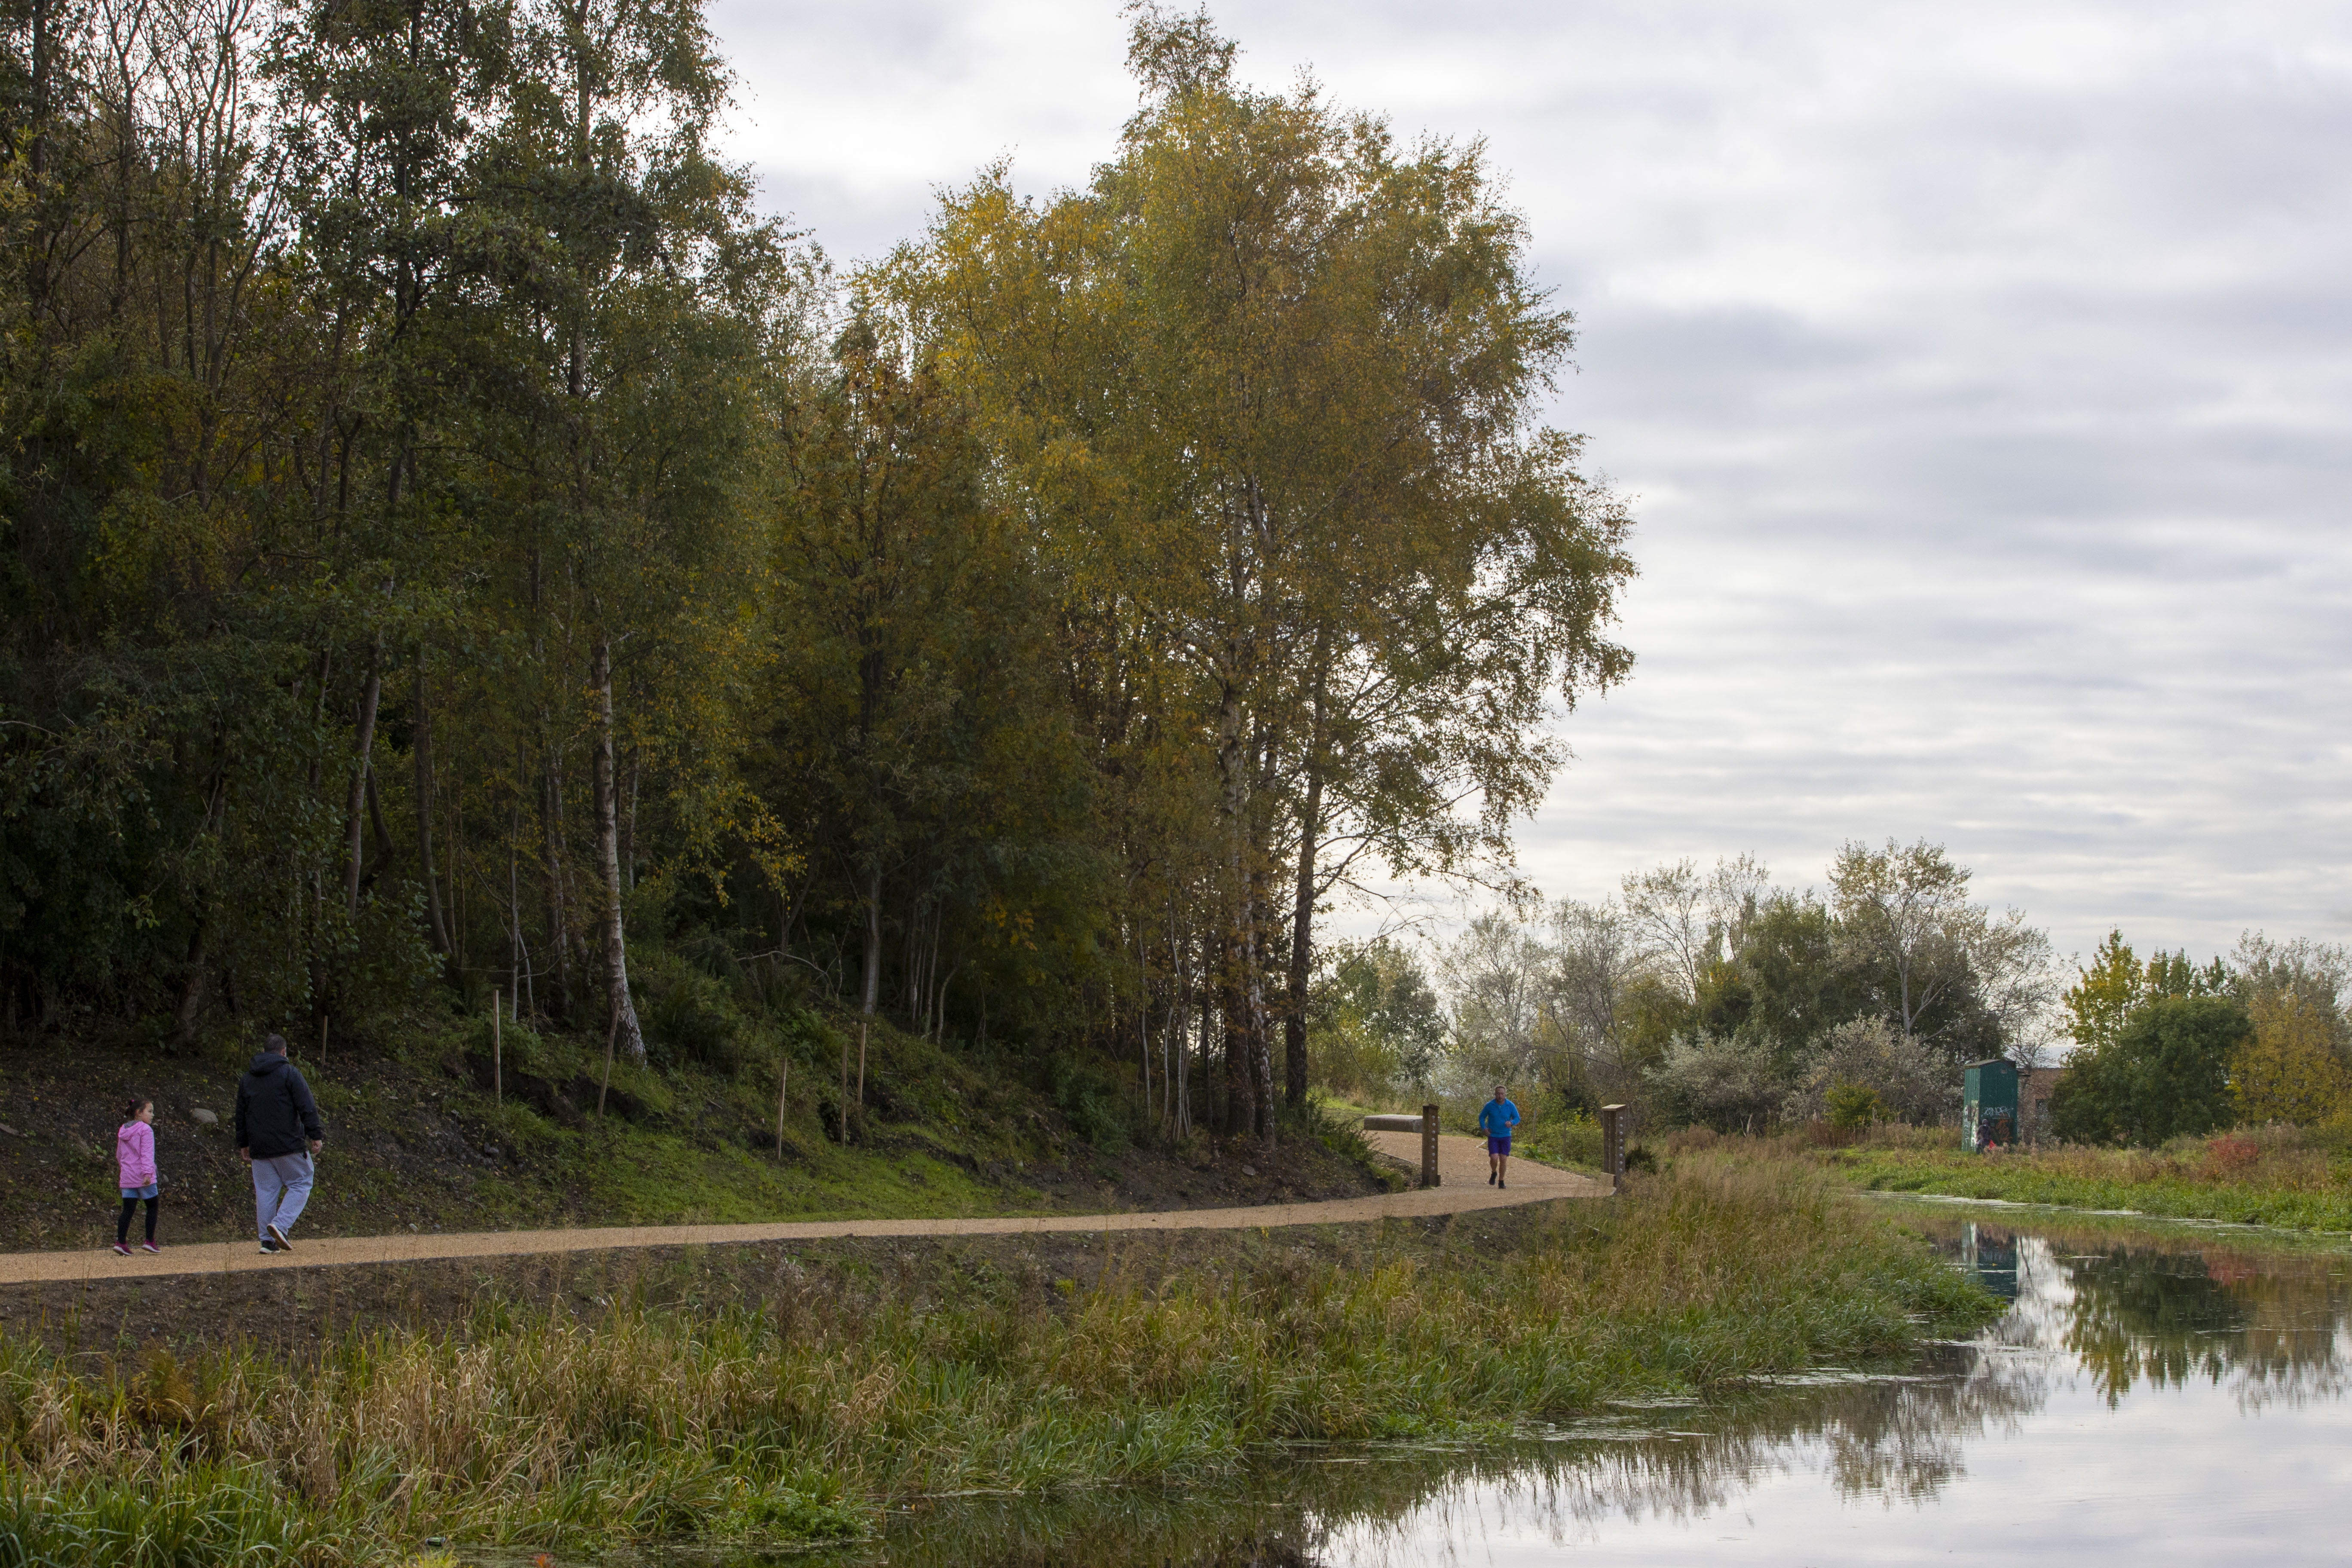 The Hamiltonhill Claypits Local Nature Reserve will benefit from the fund